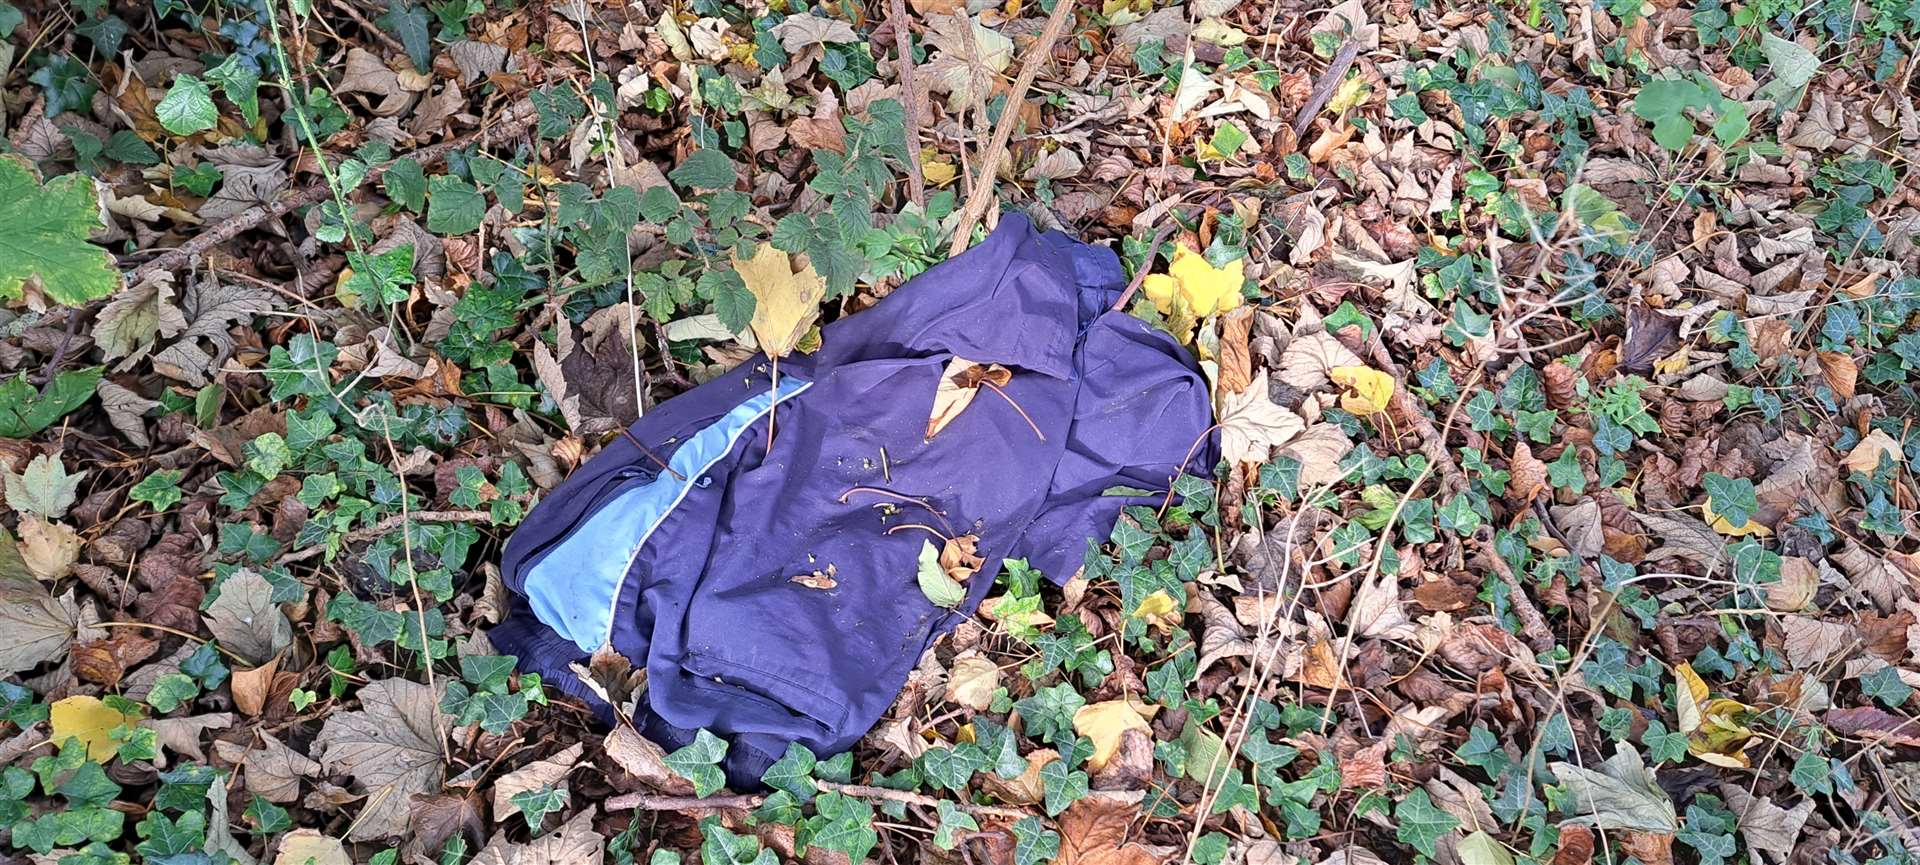 Clothing found at Borden Nature Reserve. Picture: Megan Carr